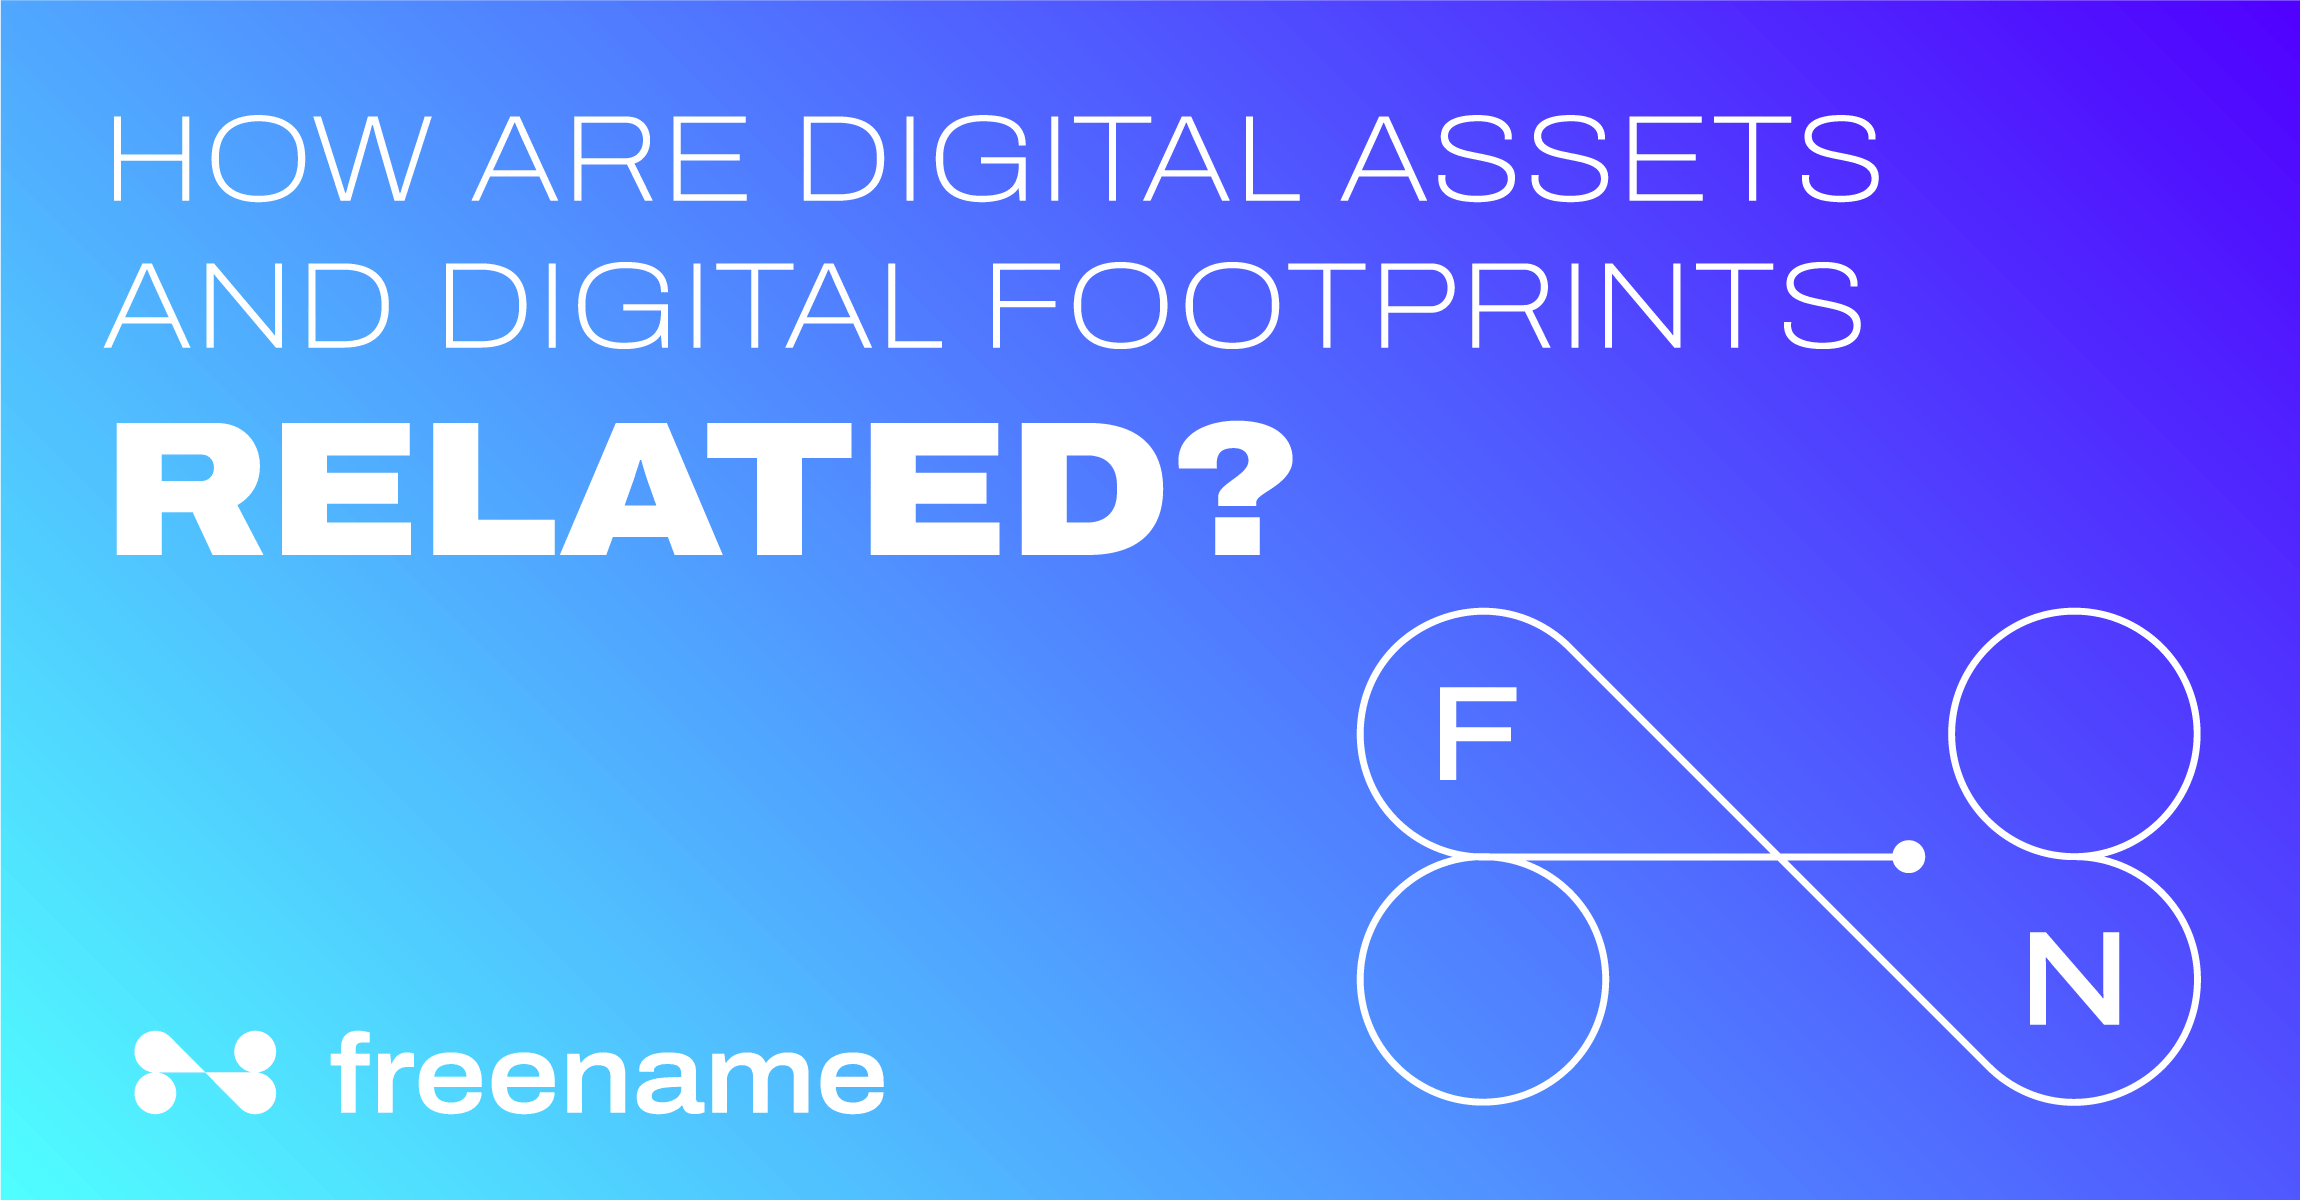 How are digital assets and digital footprints related?